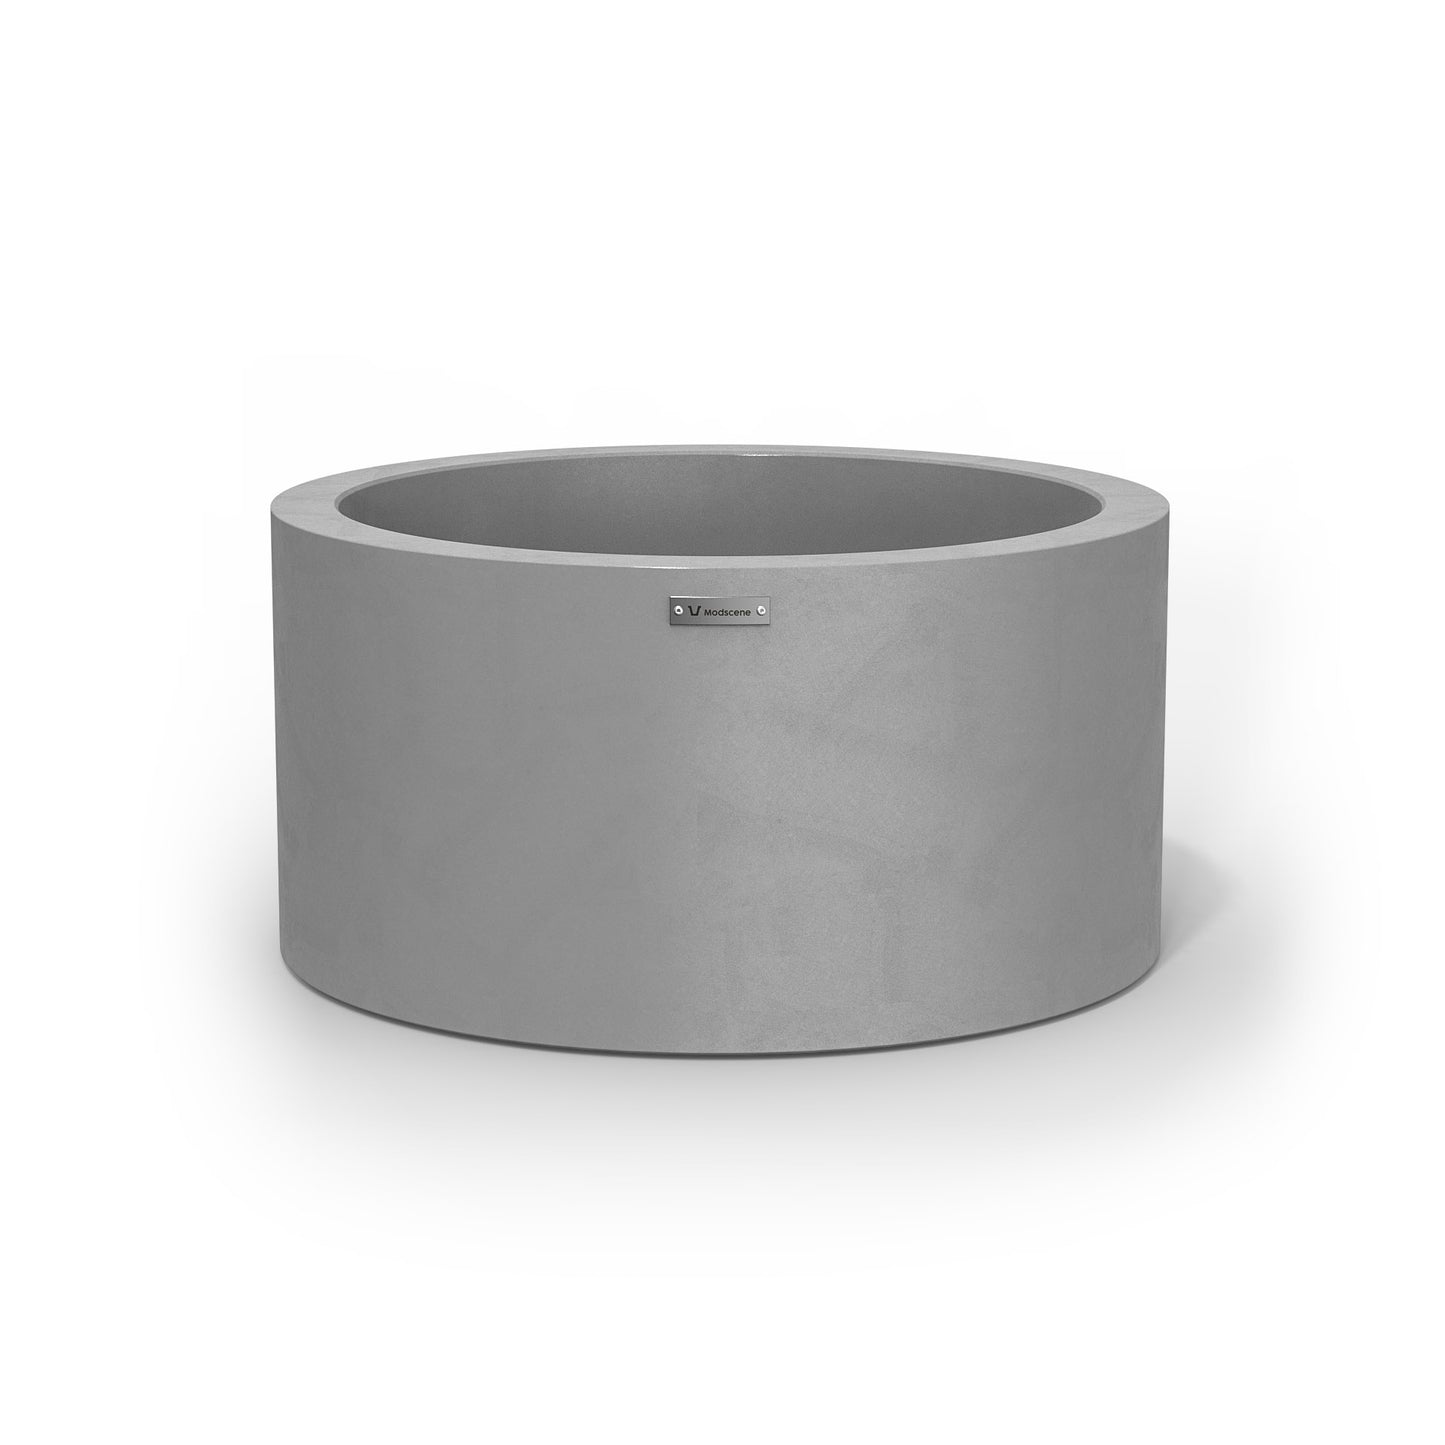 A medium sized planter pot in a concrete grey colour made by Modscene.